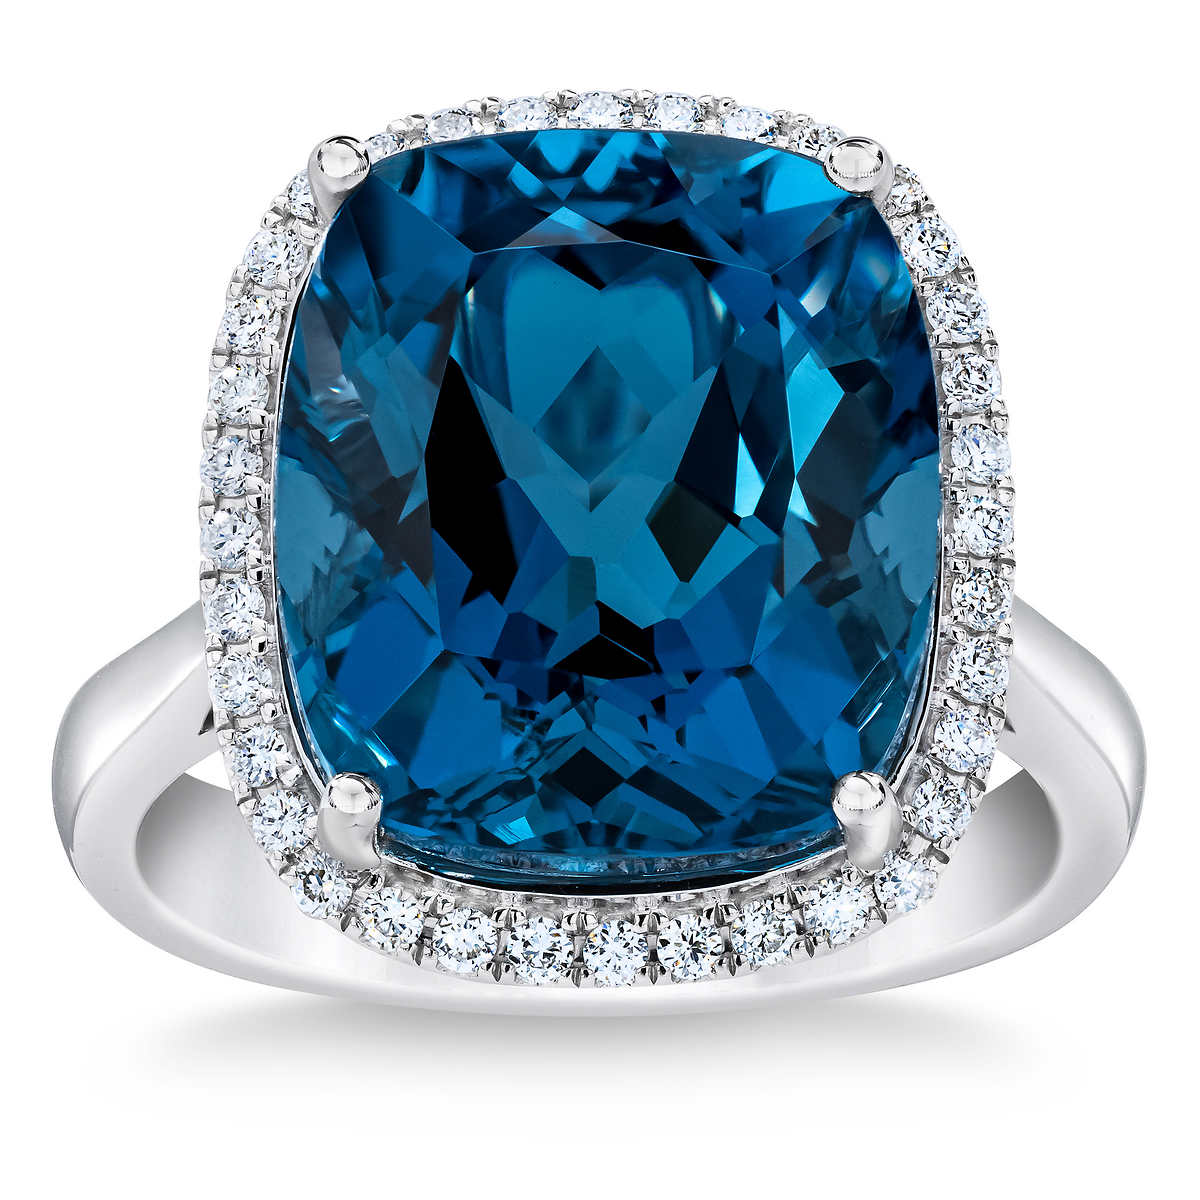 London Blue Topaz and Diamond 14kt White Gold Ring | Costco